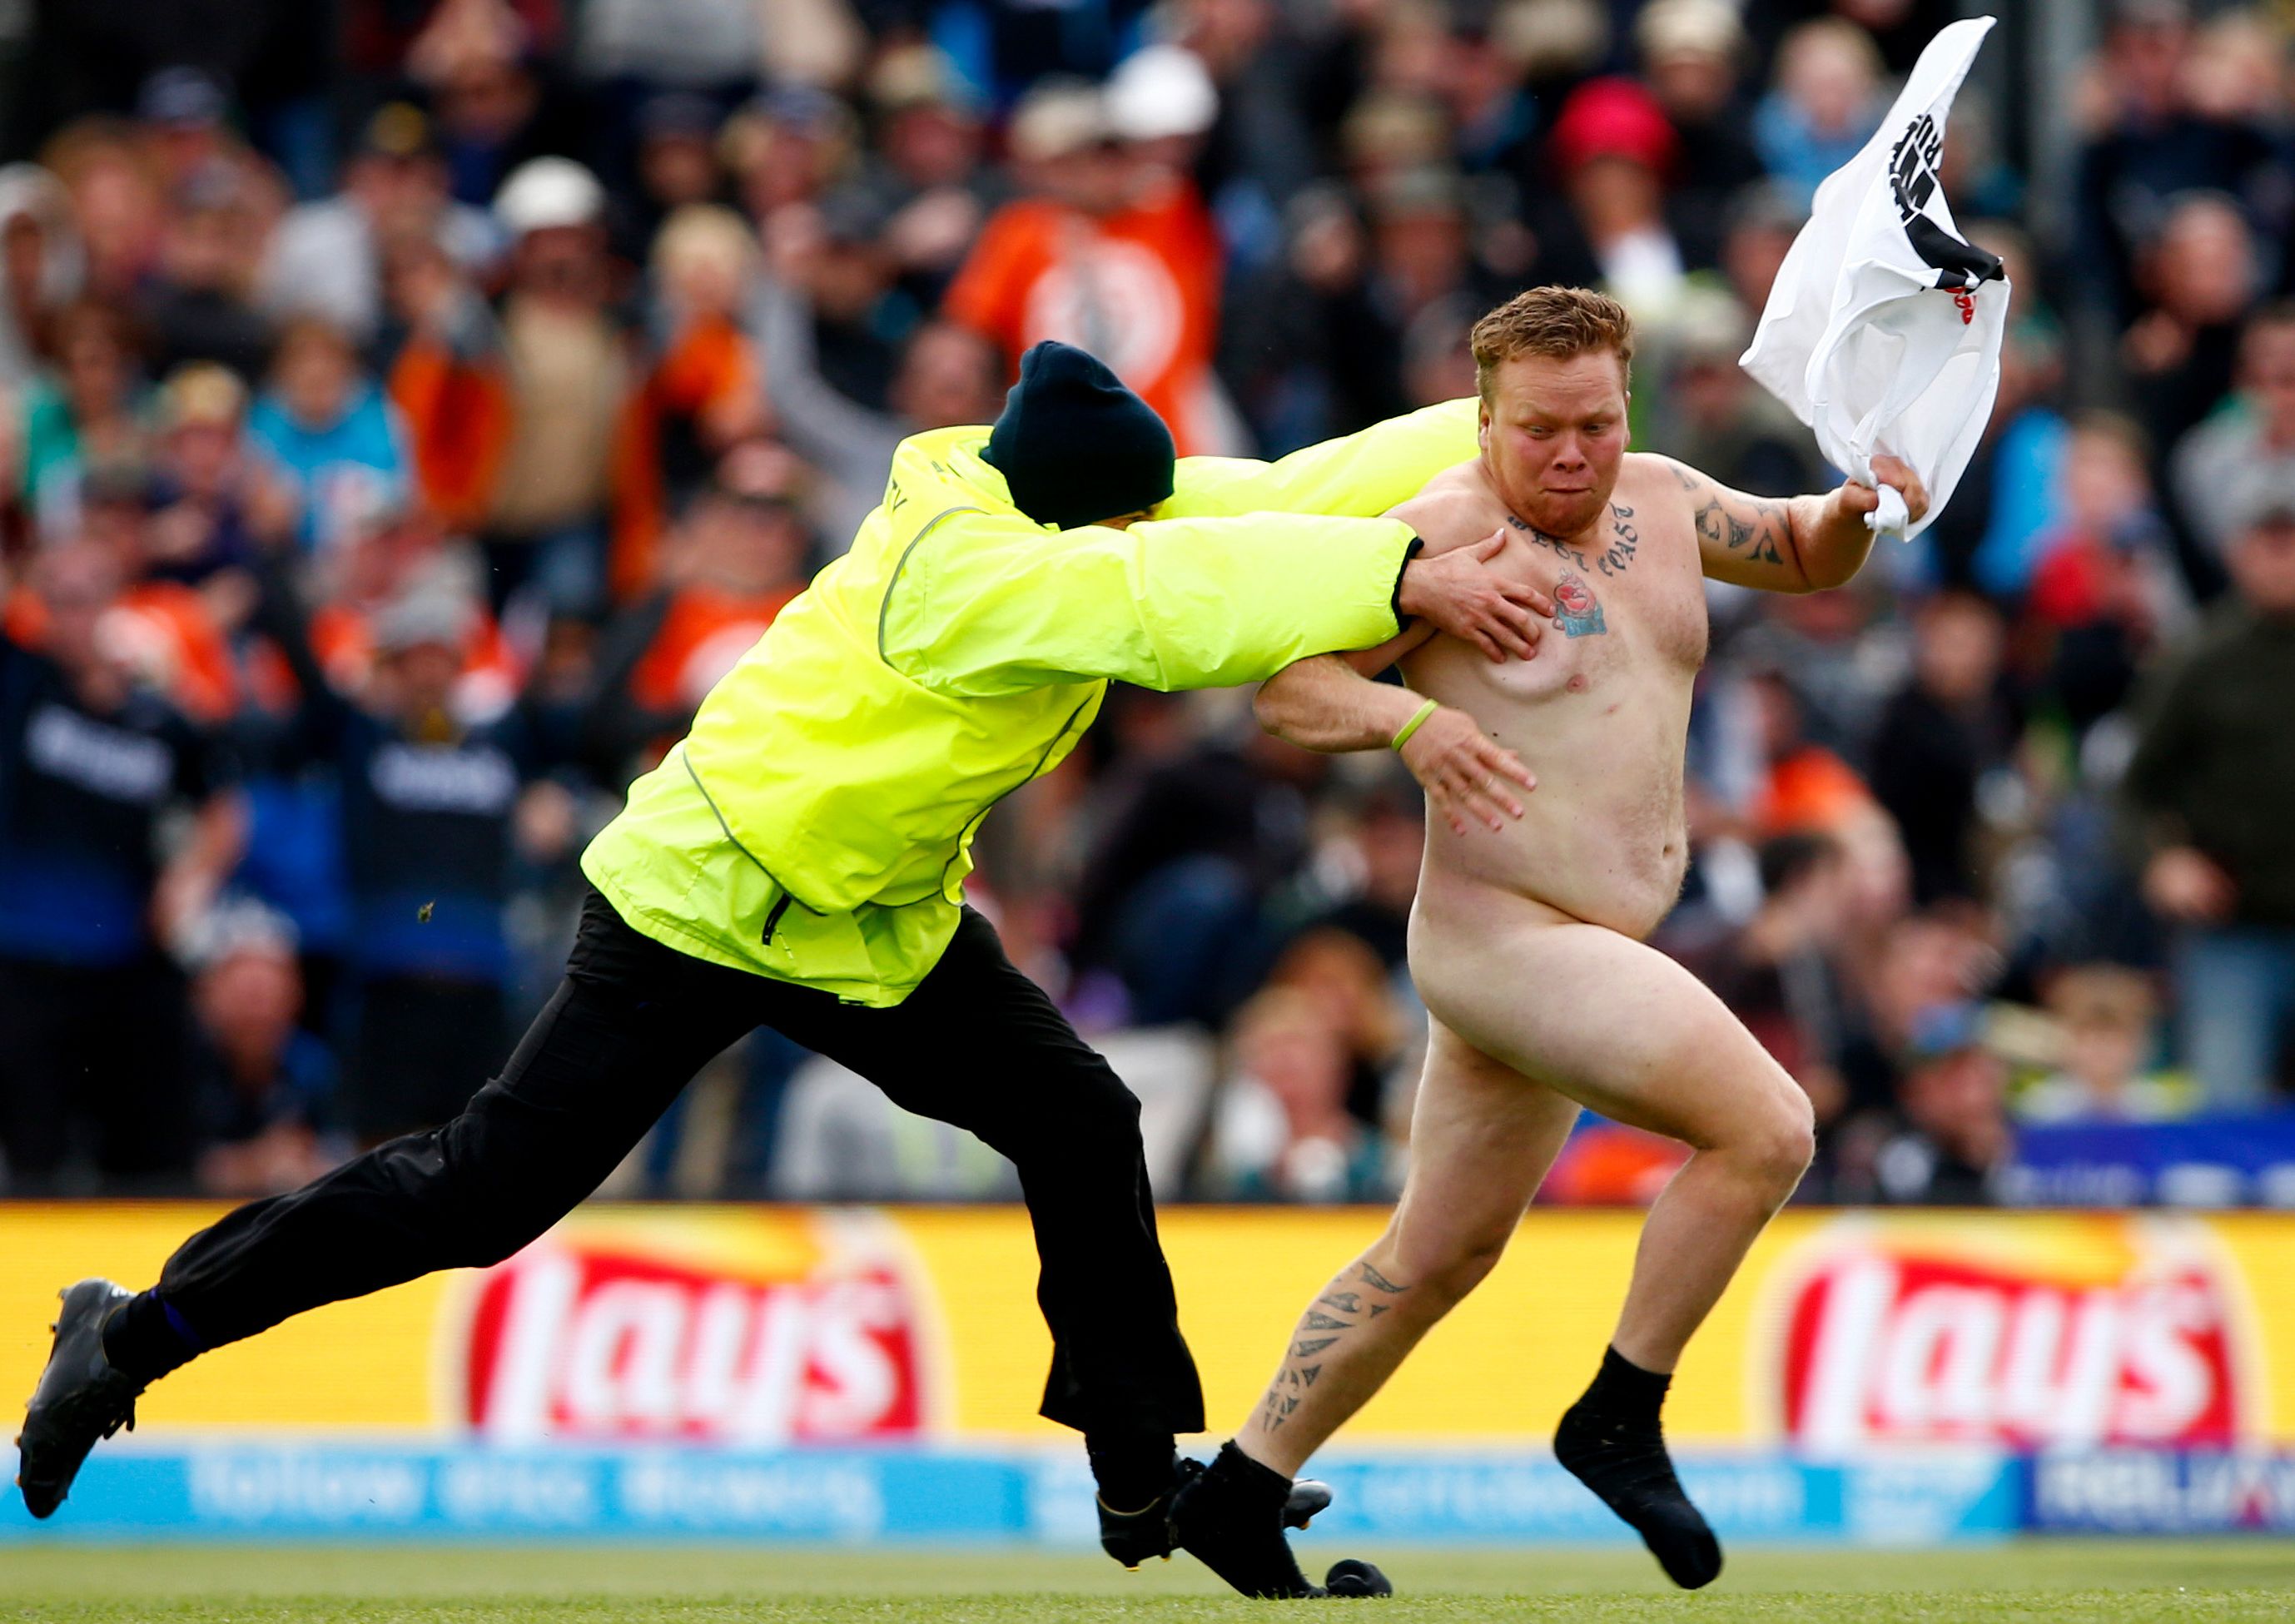 The cricket pitch invader - Photos: The Best Sports Bloopers